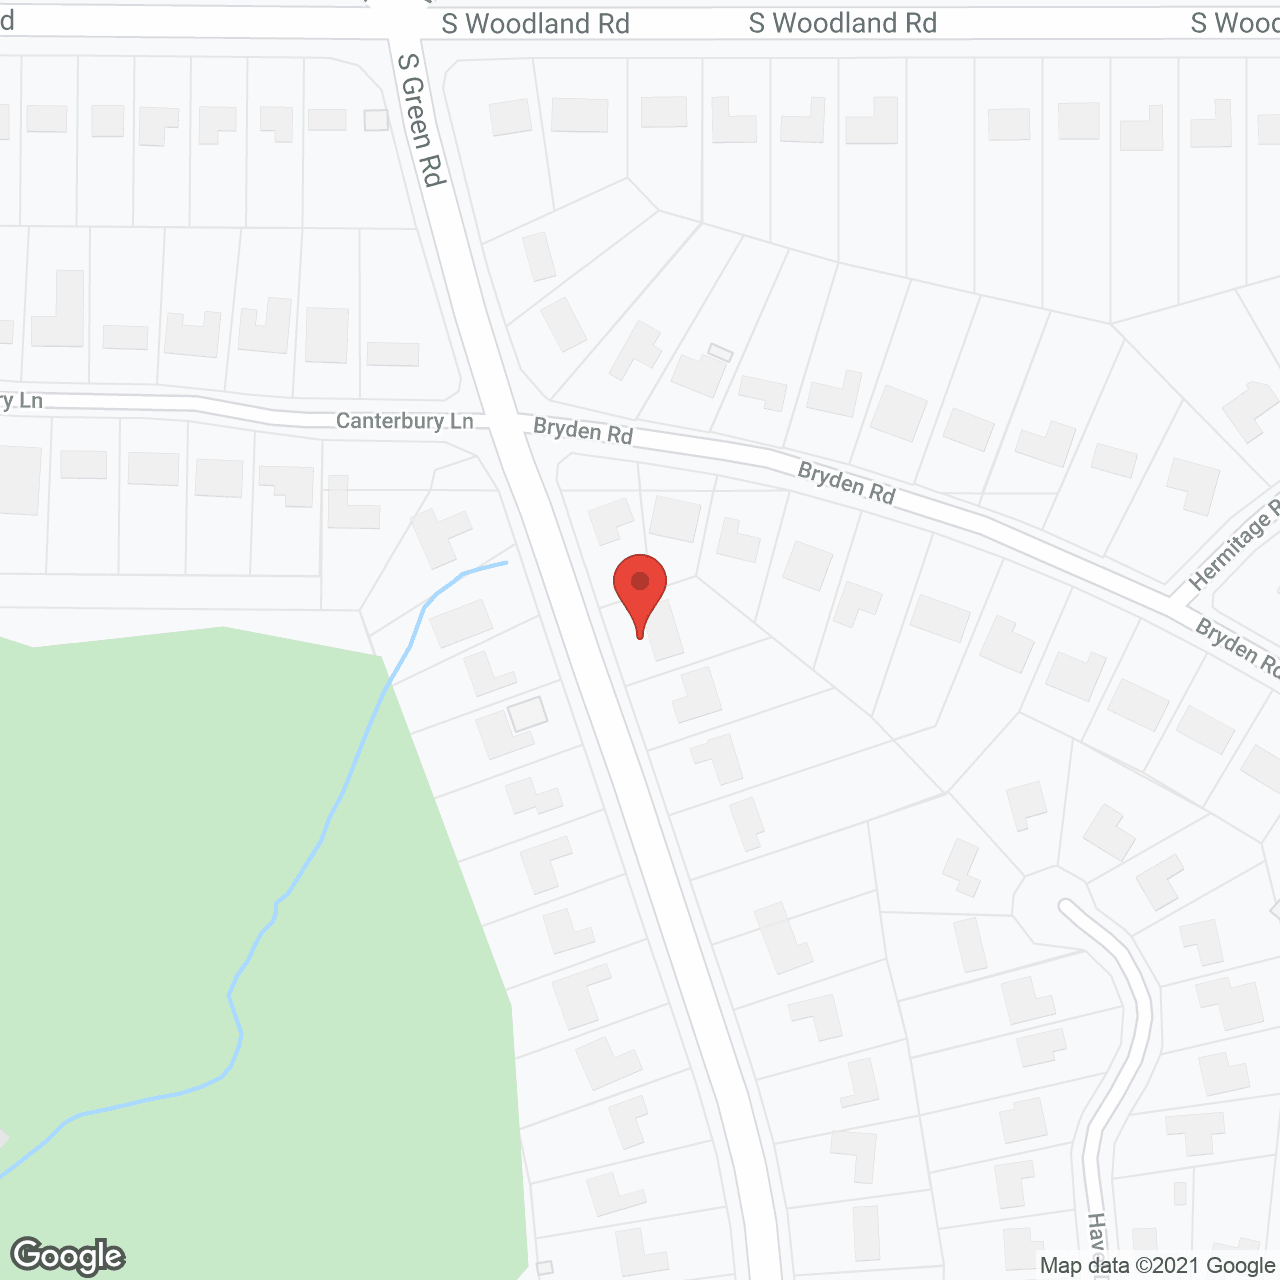 Windsor Heights Transitional Assisted Living and Memory Care in google map